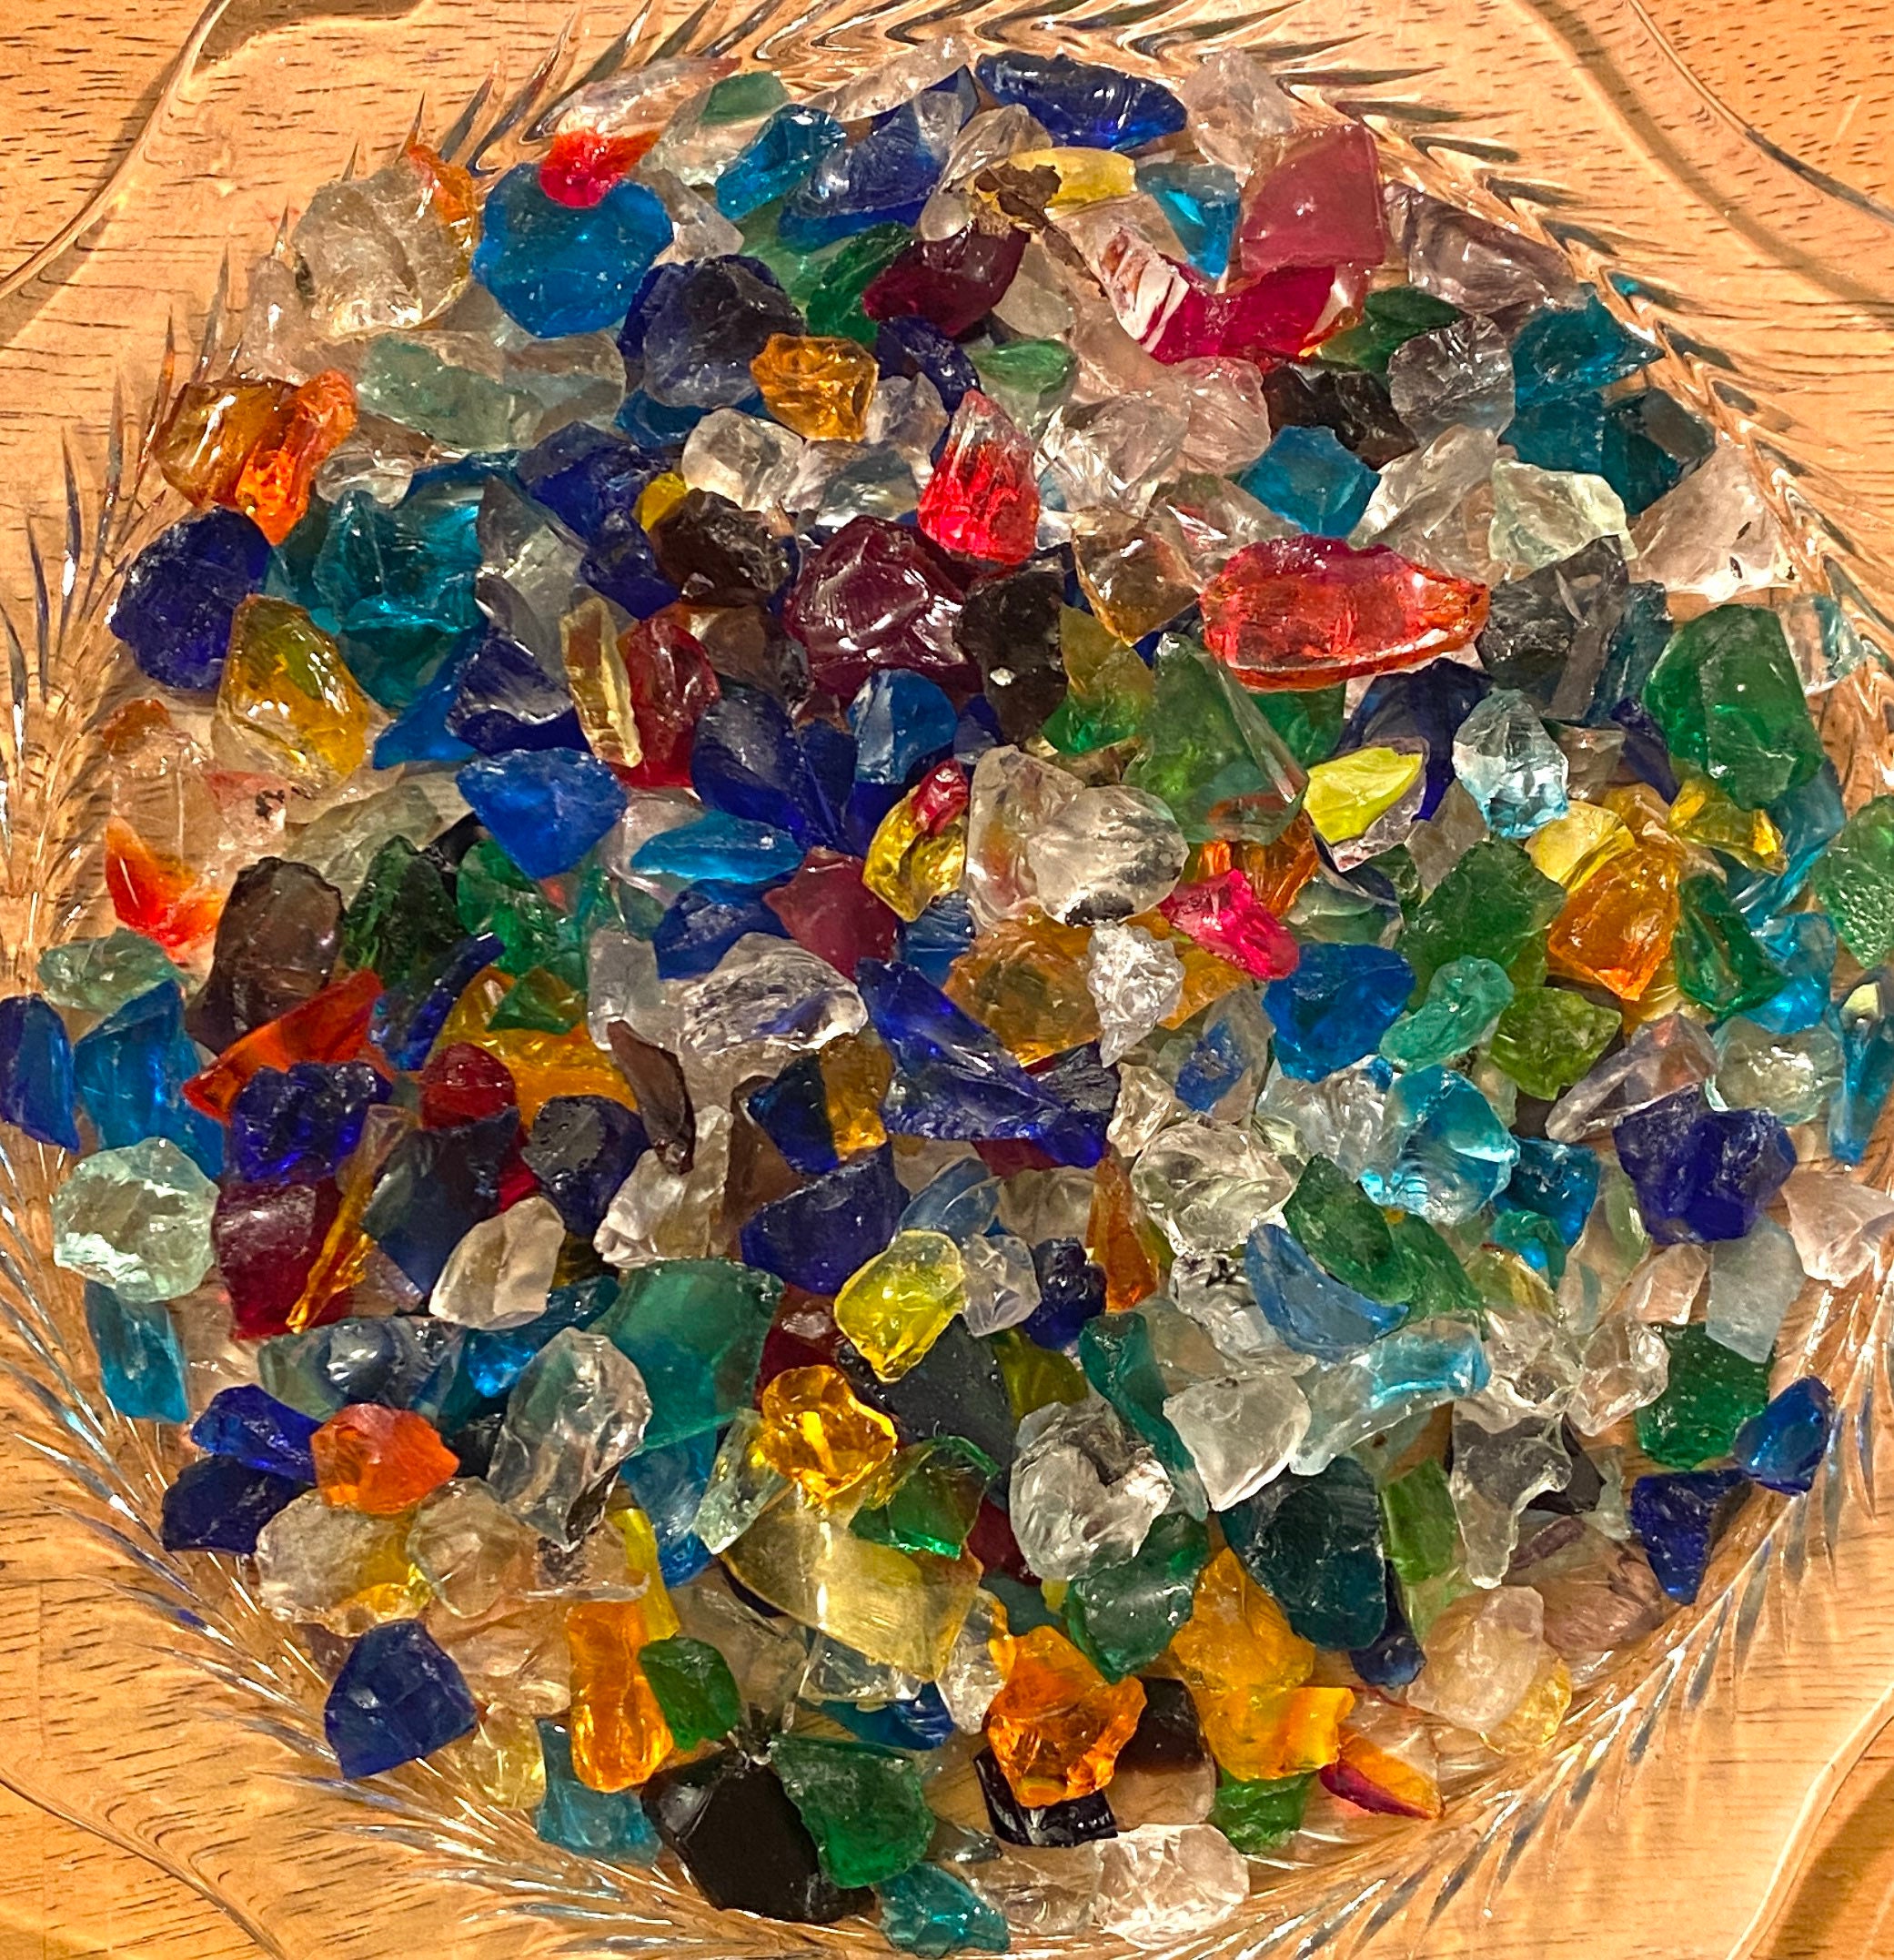 1bag/Pack 50g Mosaic Glass Pieces & Natural Crystal Beads